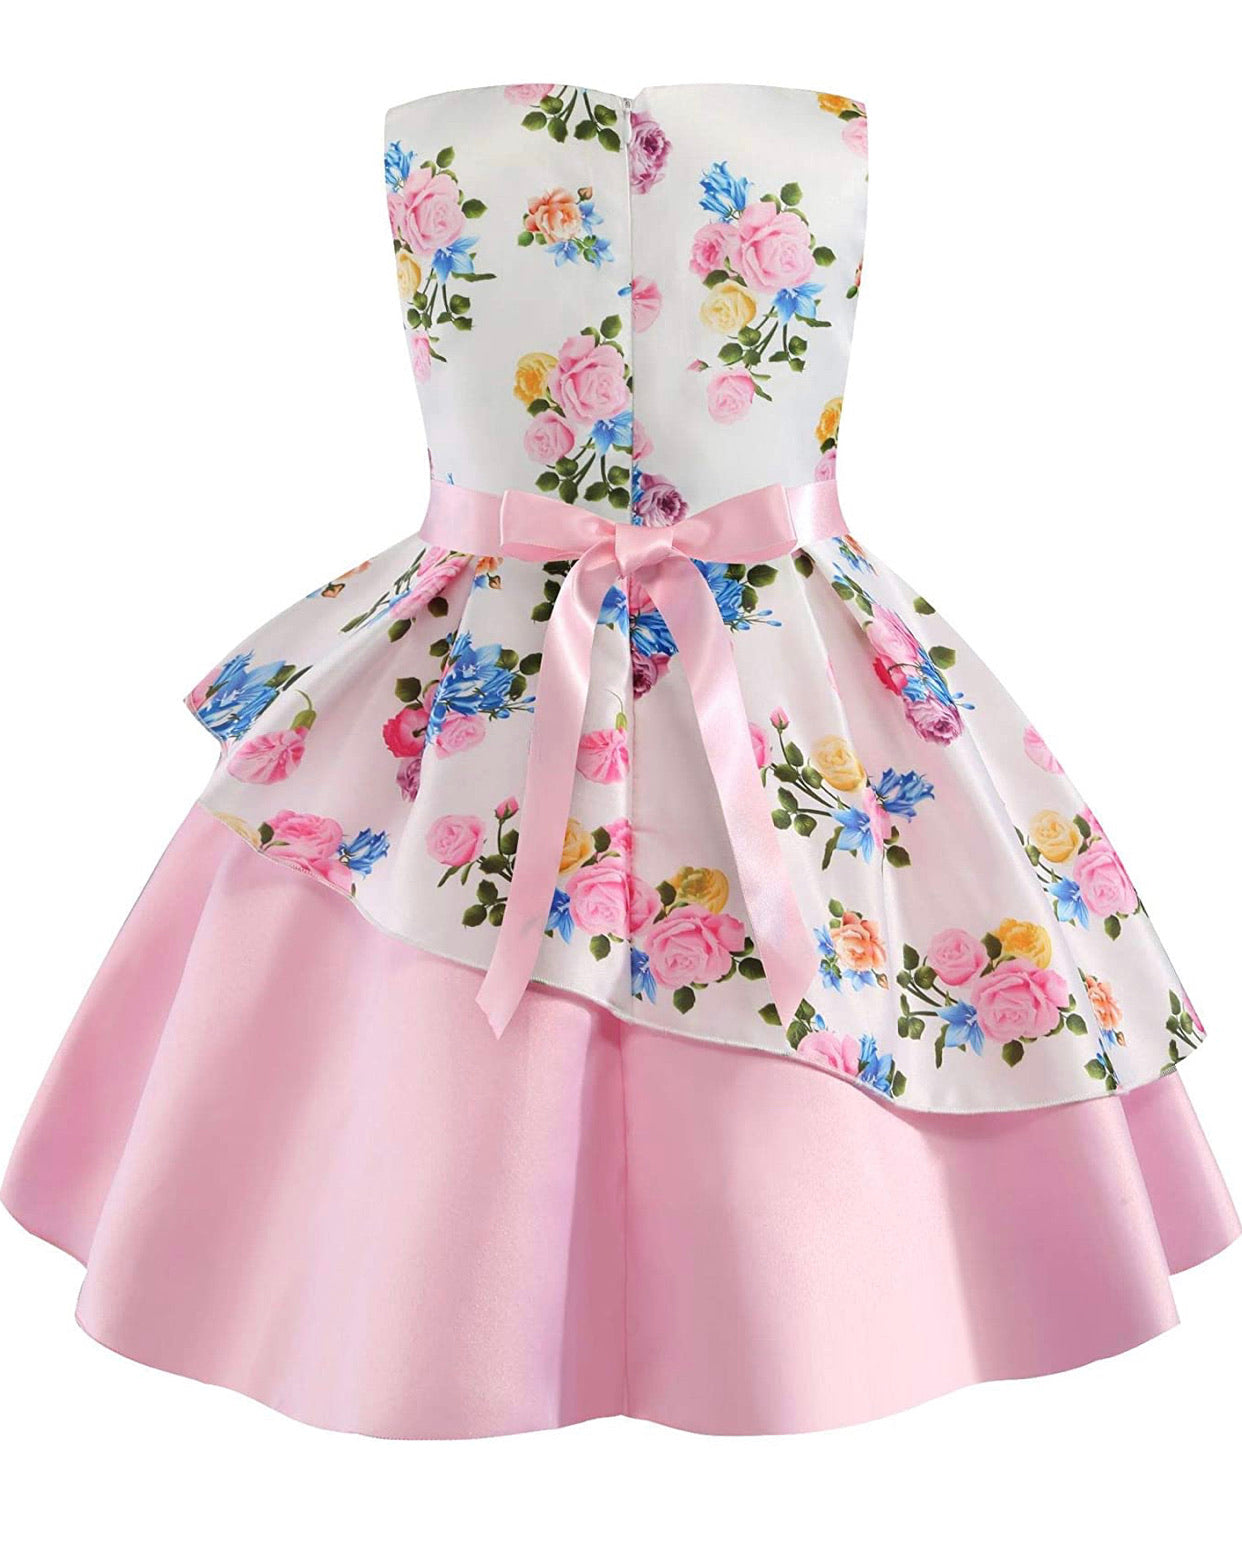 Little Girl’s Formal Floral Print Dress, Sizes 2T - 9 years (Pink)